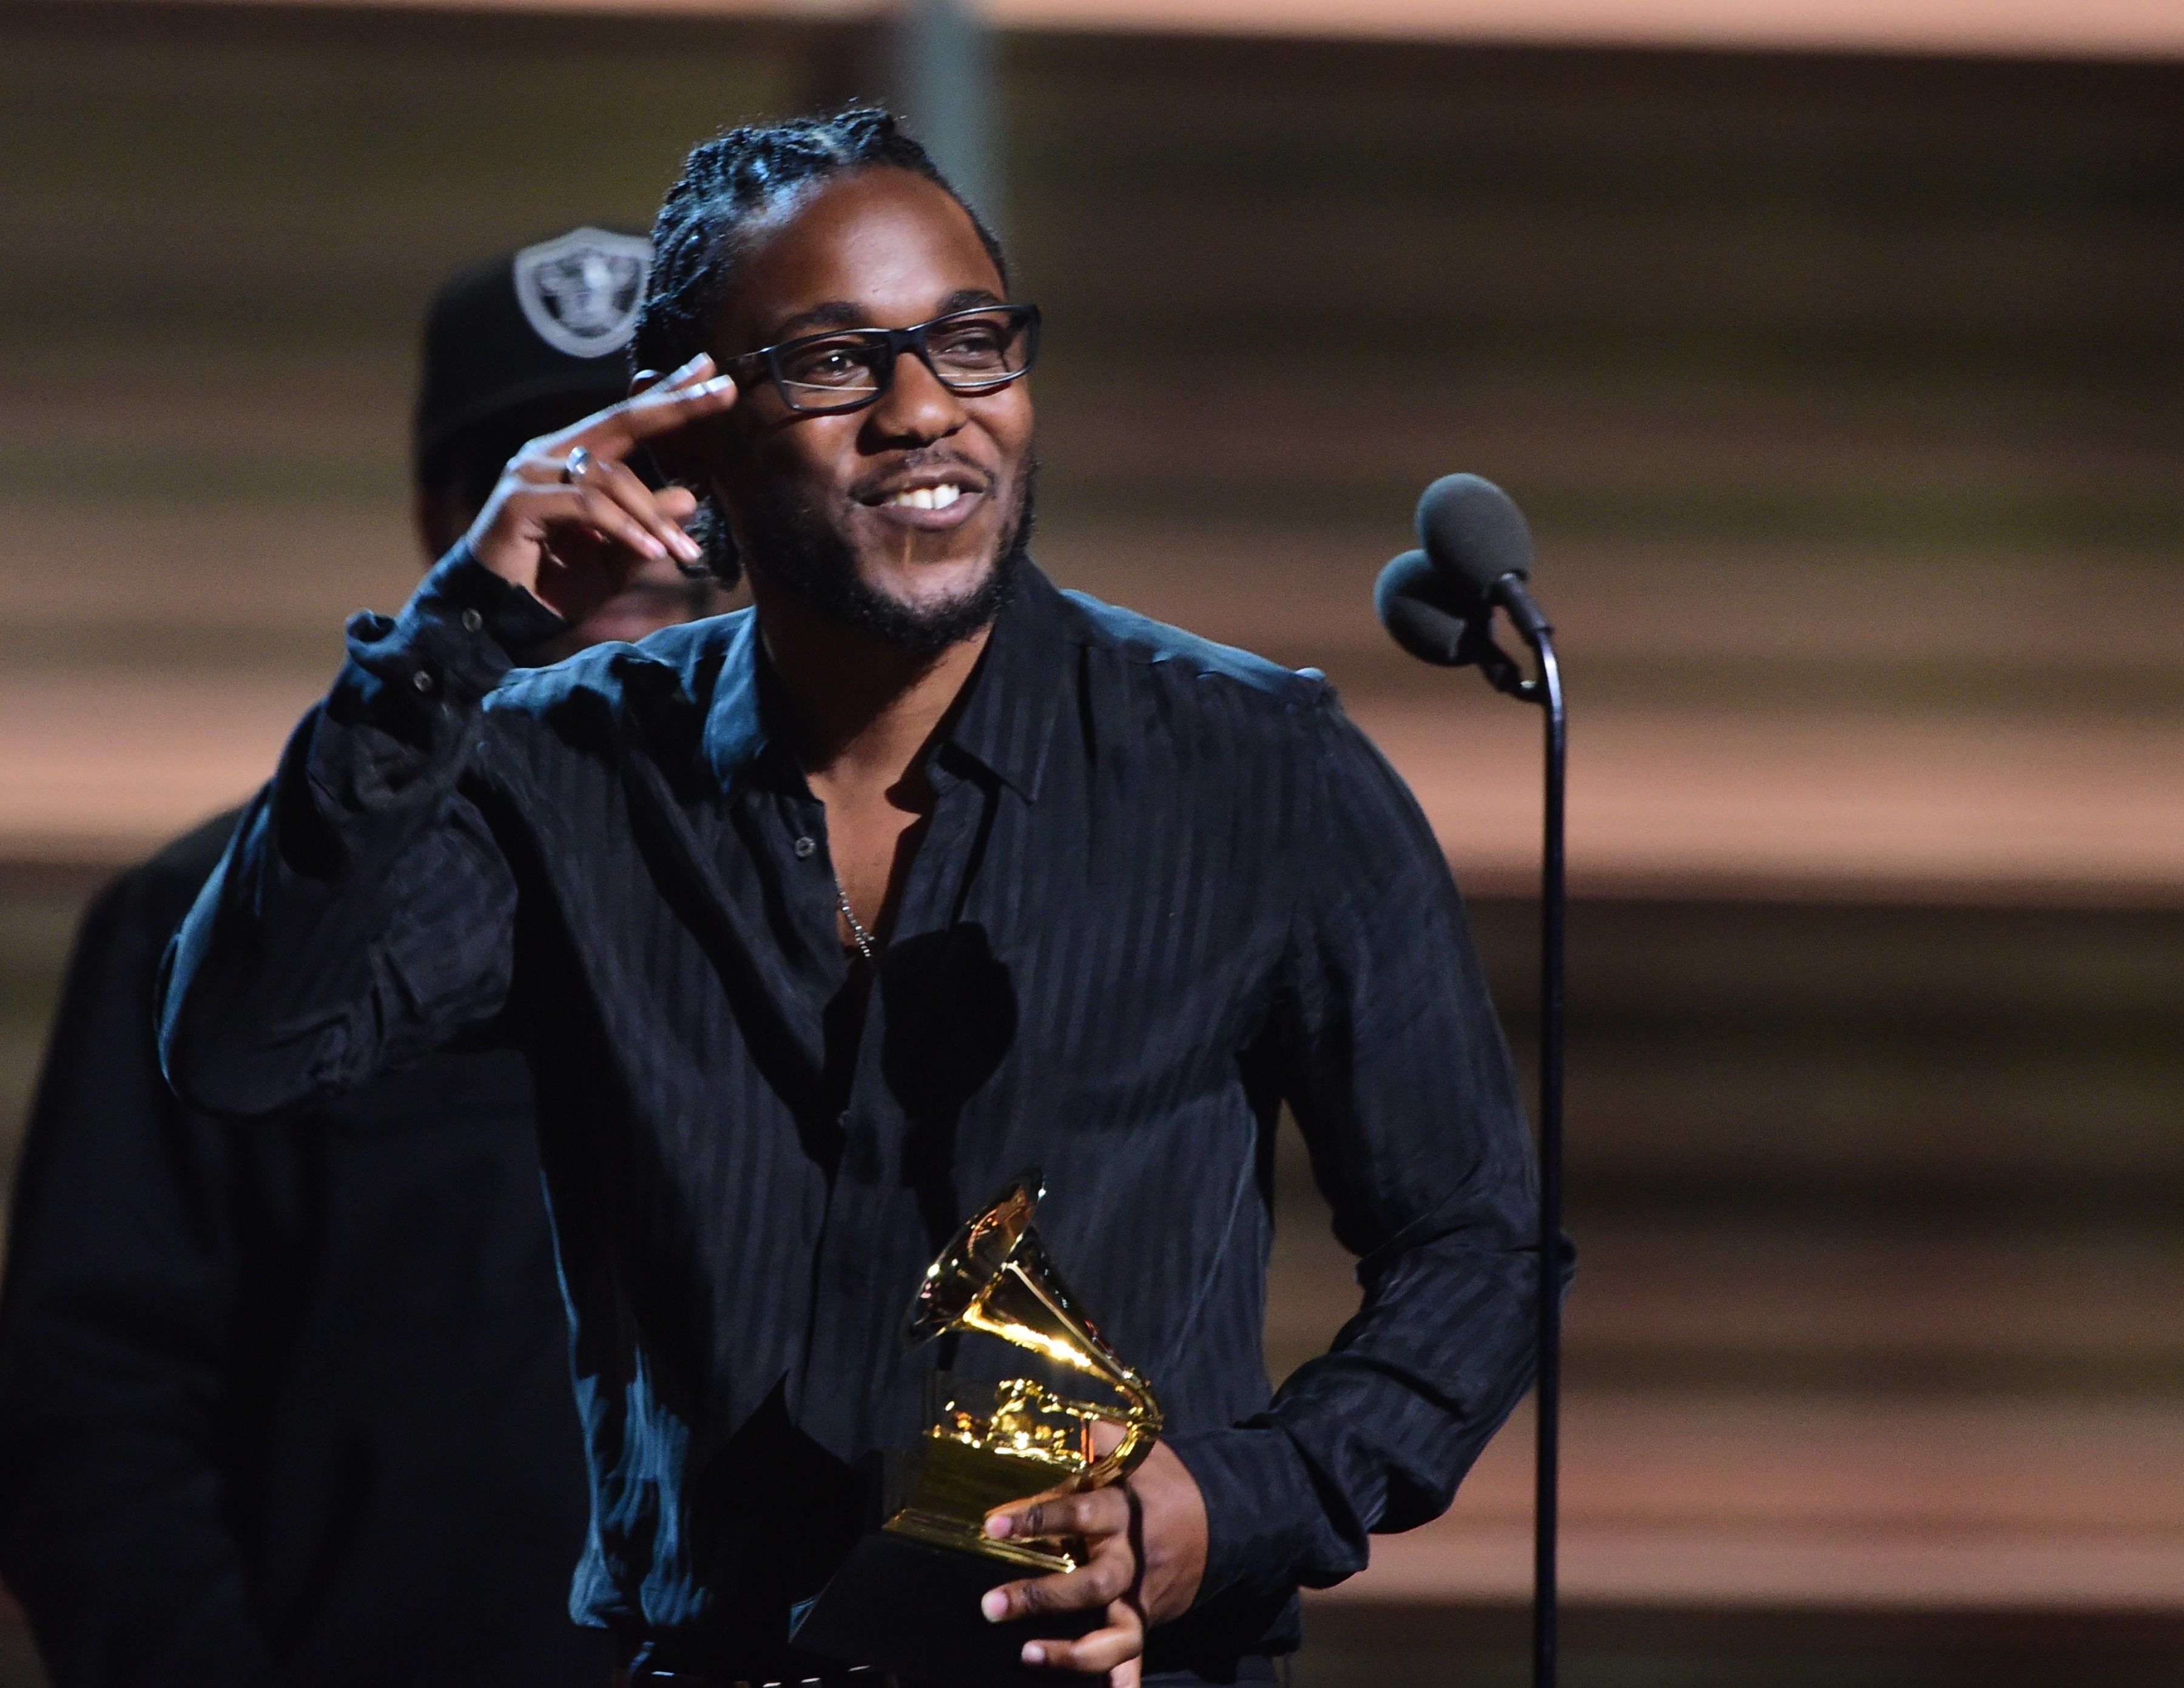 Recording artist Kendrick Lamar recieves the award for the Best Rap Album, To Pimp A Butterfly during the 58th Annual Grammy music Awards in Los Angeles February 15, 2016. AFP PHOTO/ ROBYN BECK / AFP / ROBYN BECK